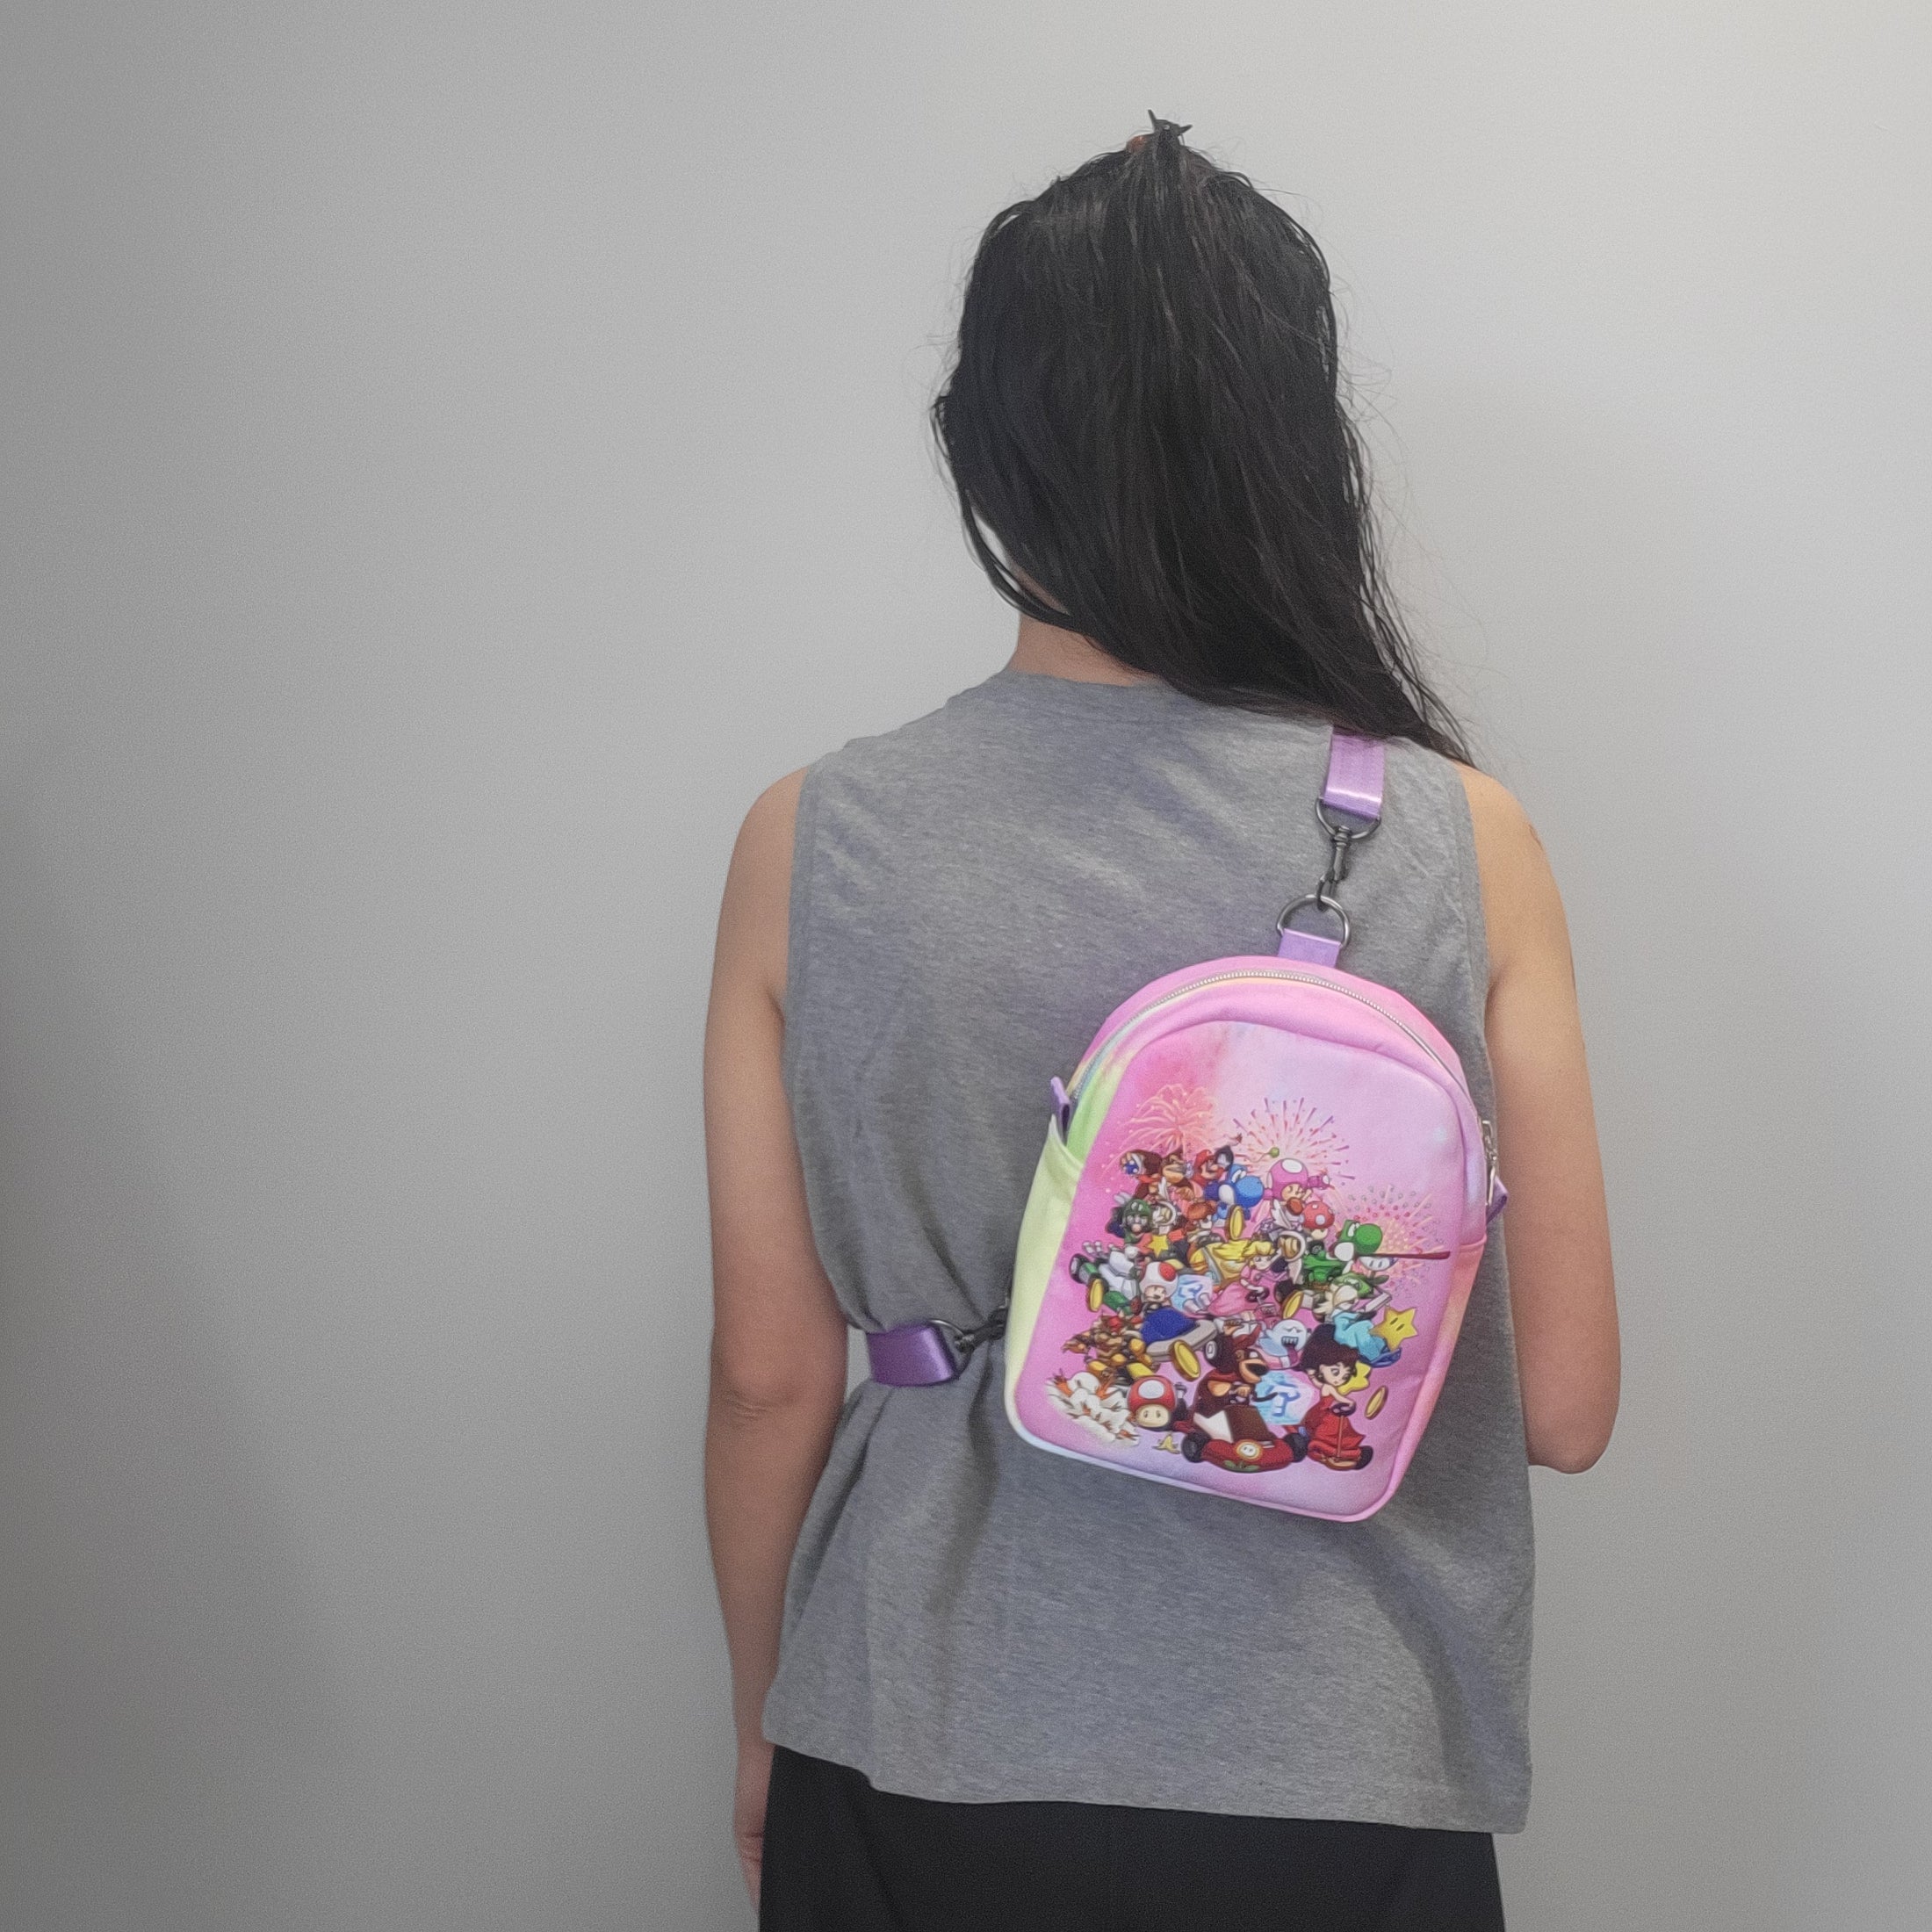 Person wearing the Mario Kart inspired bag as a crossbody.